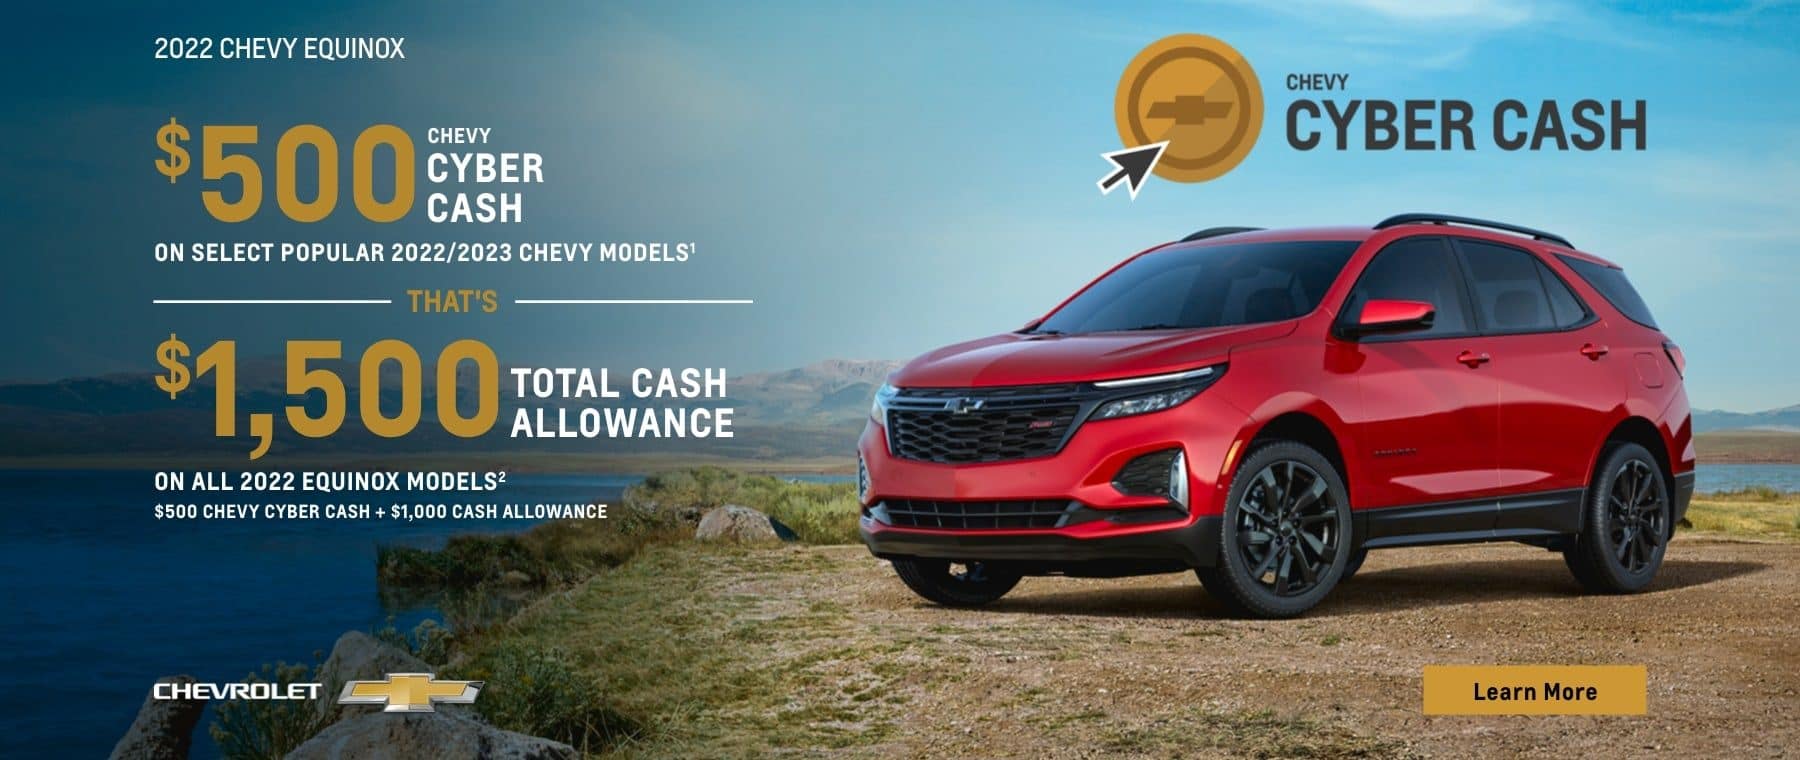 $500 Chevy Cyber Cash on select popular 2022/2023 Chevy models. That's $1,500 total cash allowance on all 2022 Equinox models. $500 Chevy Cyber Cash + $1,000 Cash Allowance.